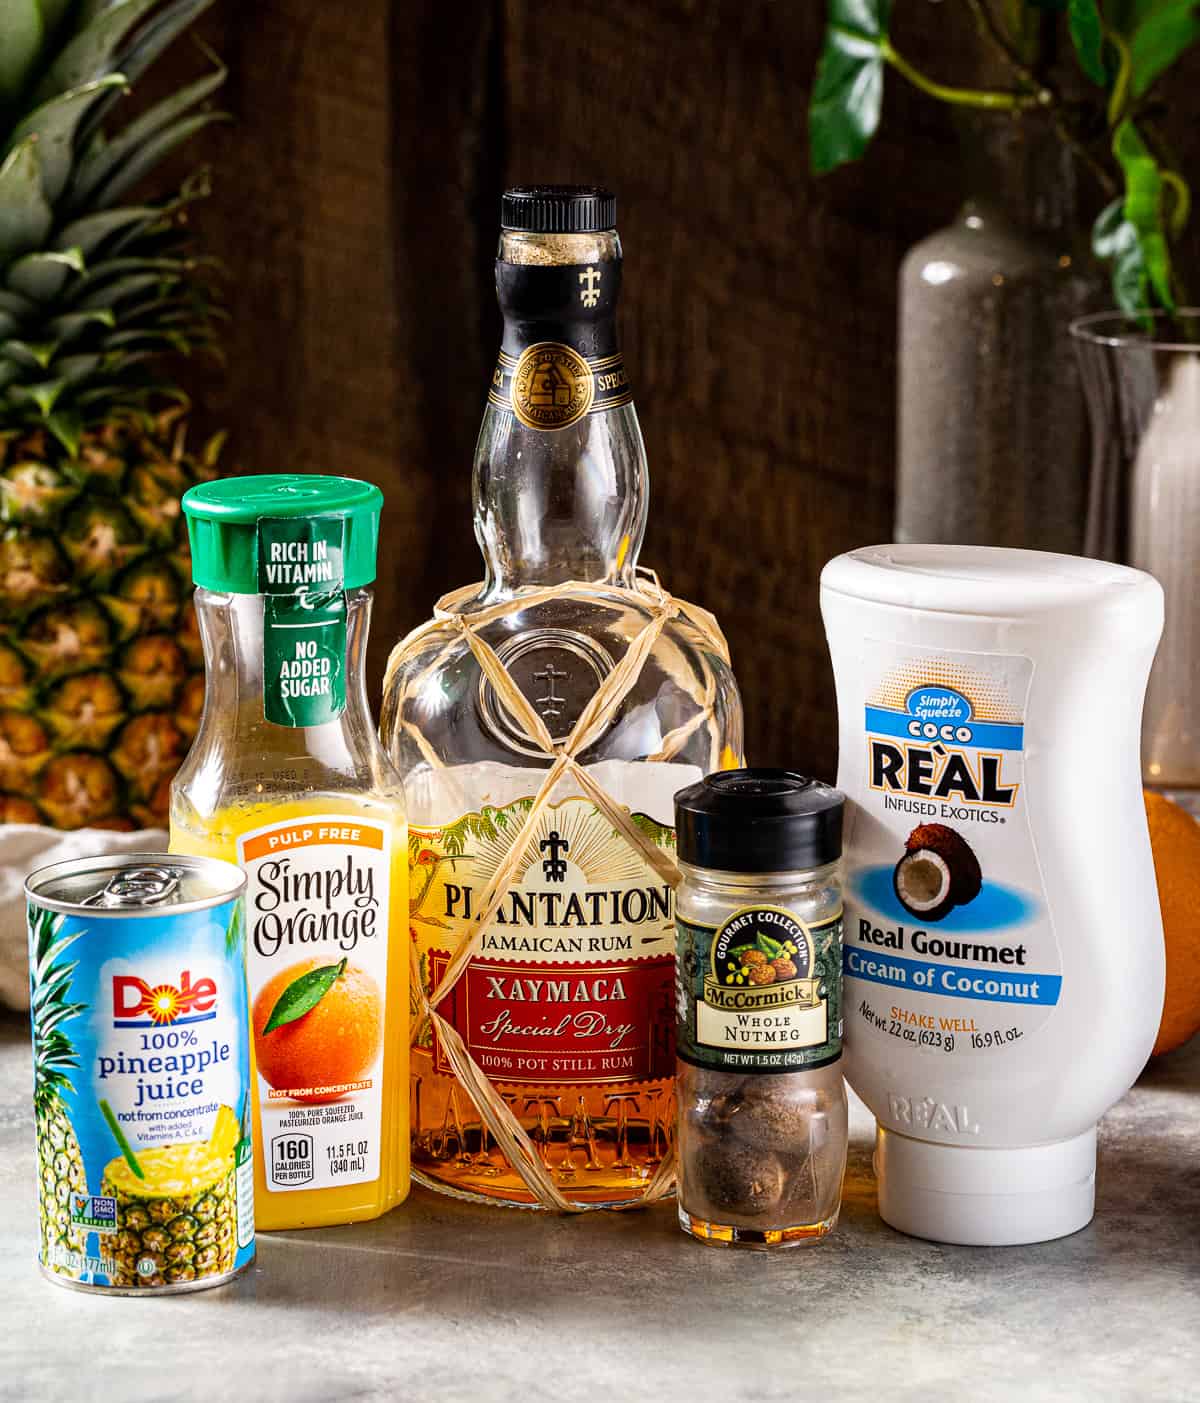 Ingredients for a Painkiller rum cocktail on a countertop.